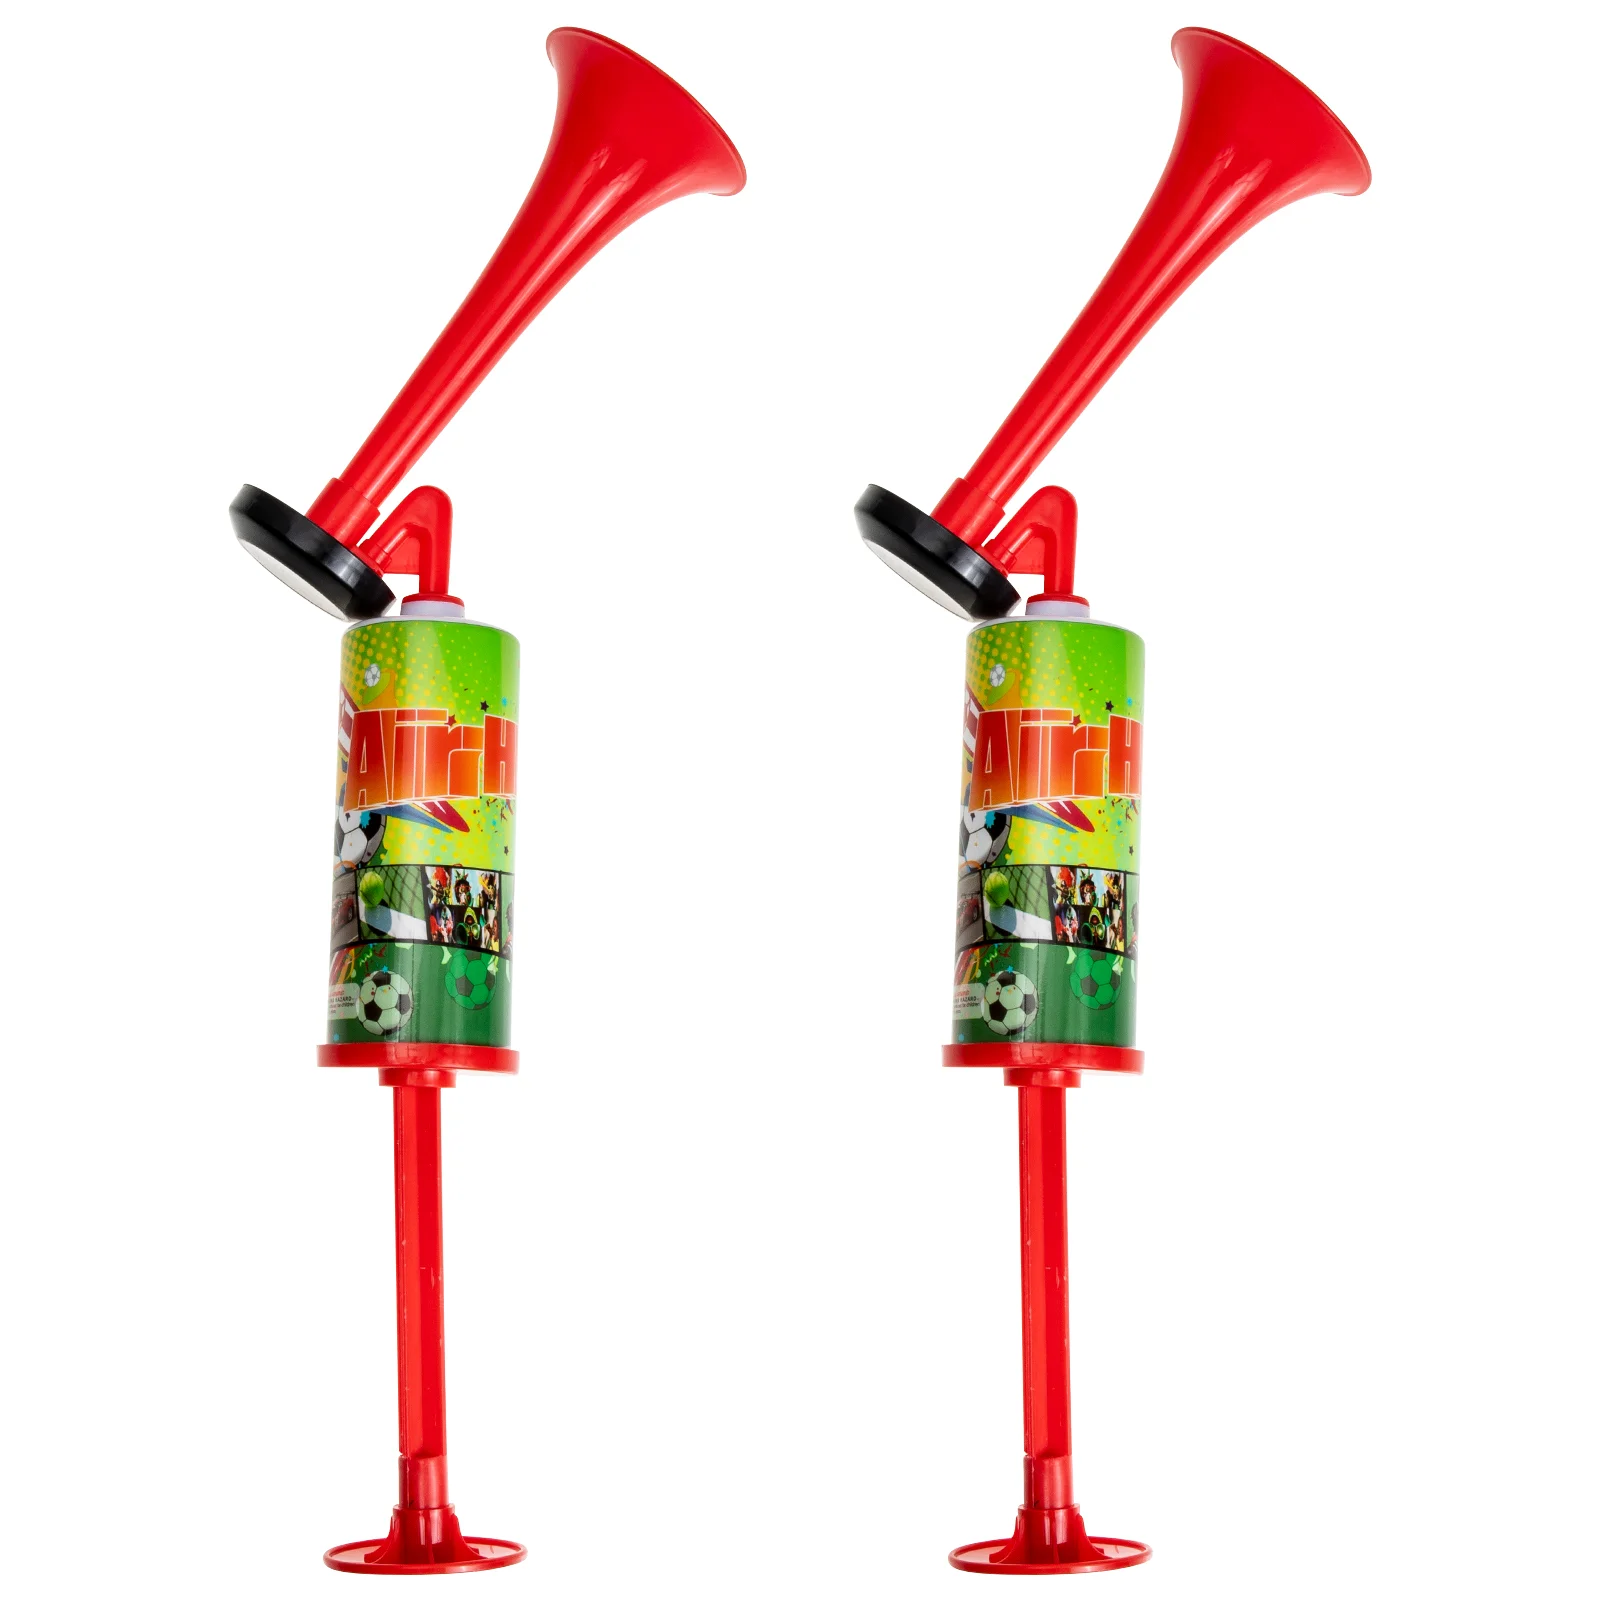 

Horn Air Hand Pump Push Cheer Horns Noisemaker Boat Party Handheld Loud Kids Safety Noise Held Mini Fans Blast Maker Toy Trumpet